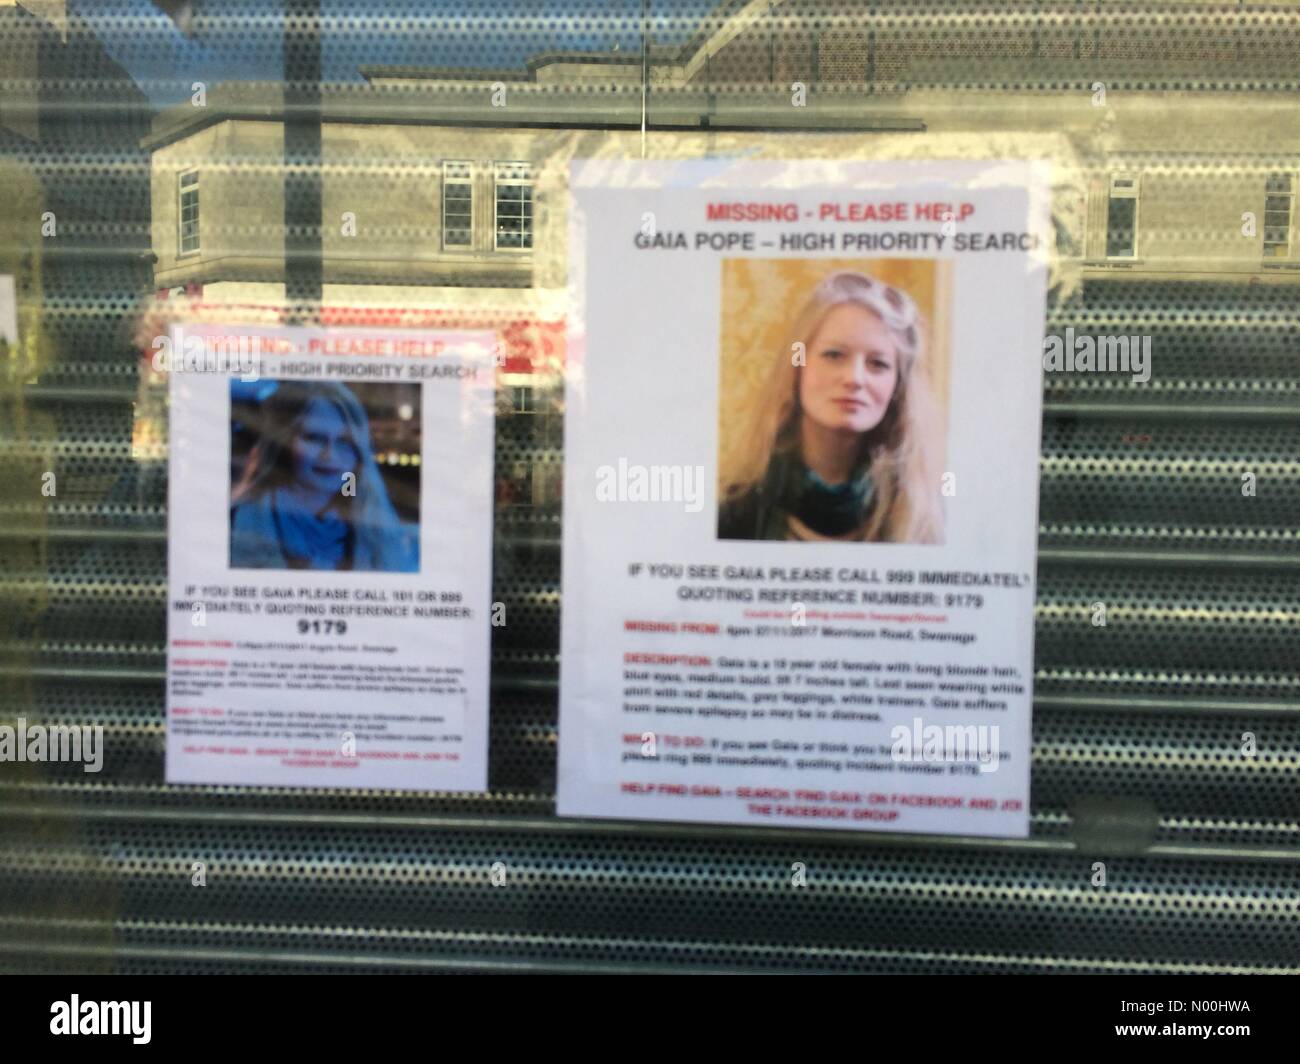 Southampton, UK. 17th Nov, 2017. Posters appealing for information about Gaia Pope, in glass window of Southampton shop. Credit: Paulo/StockimoNews/Alamy Live News Stock Photo